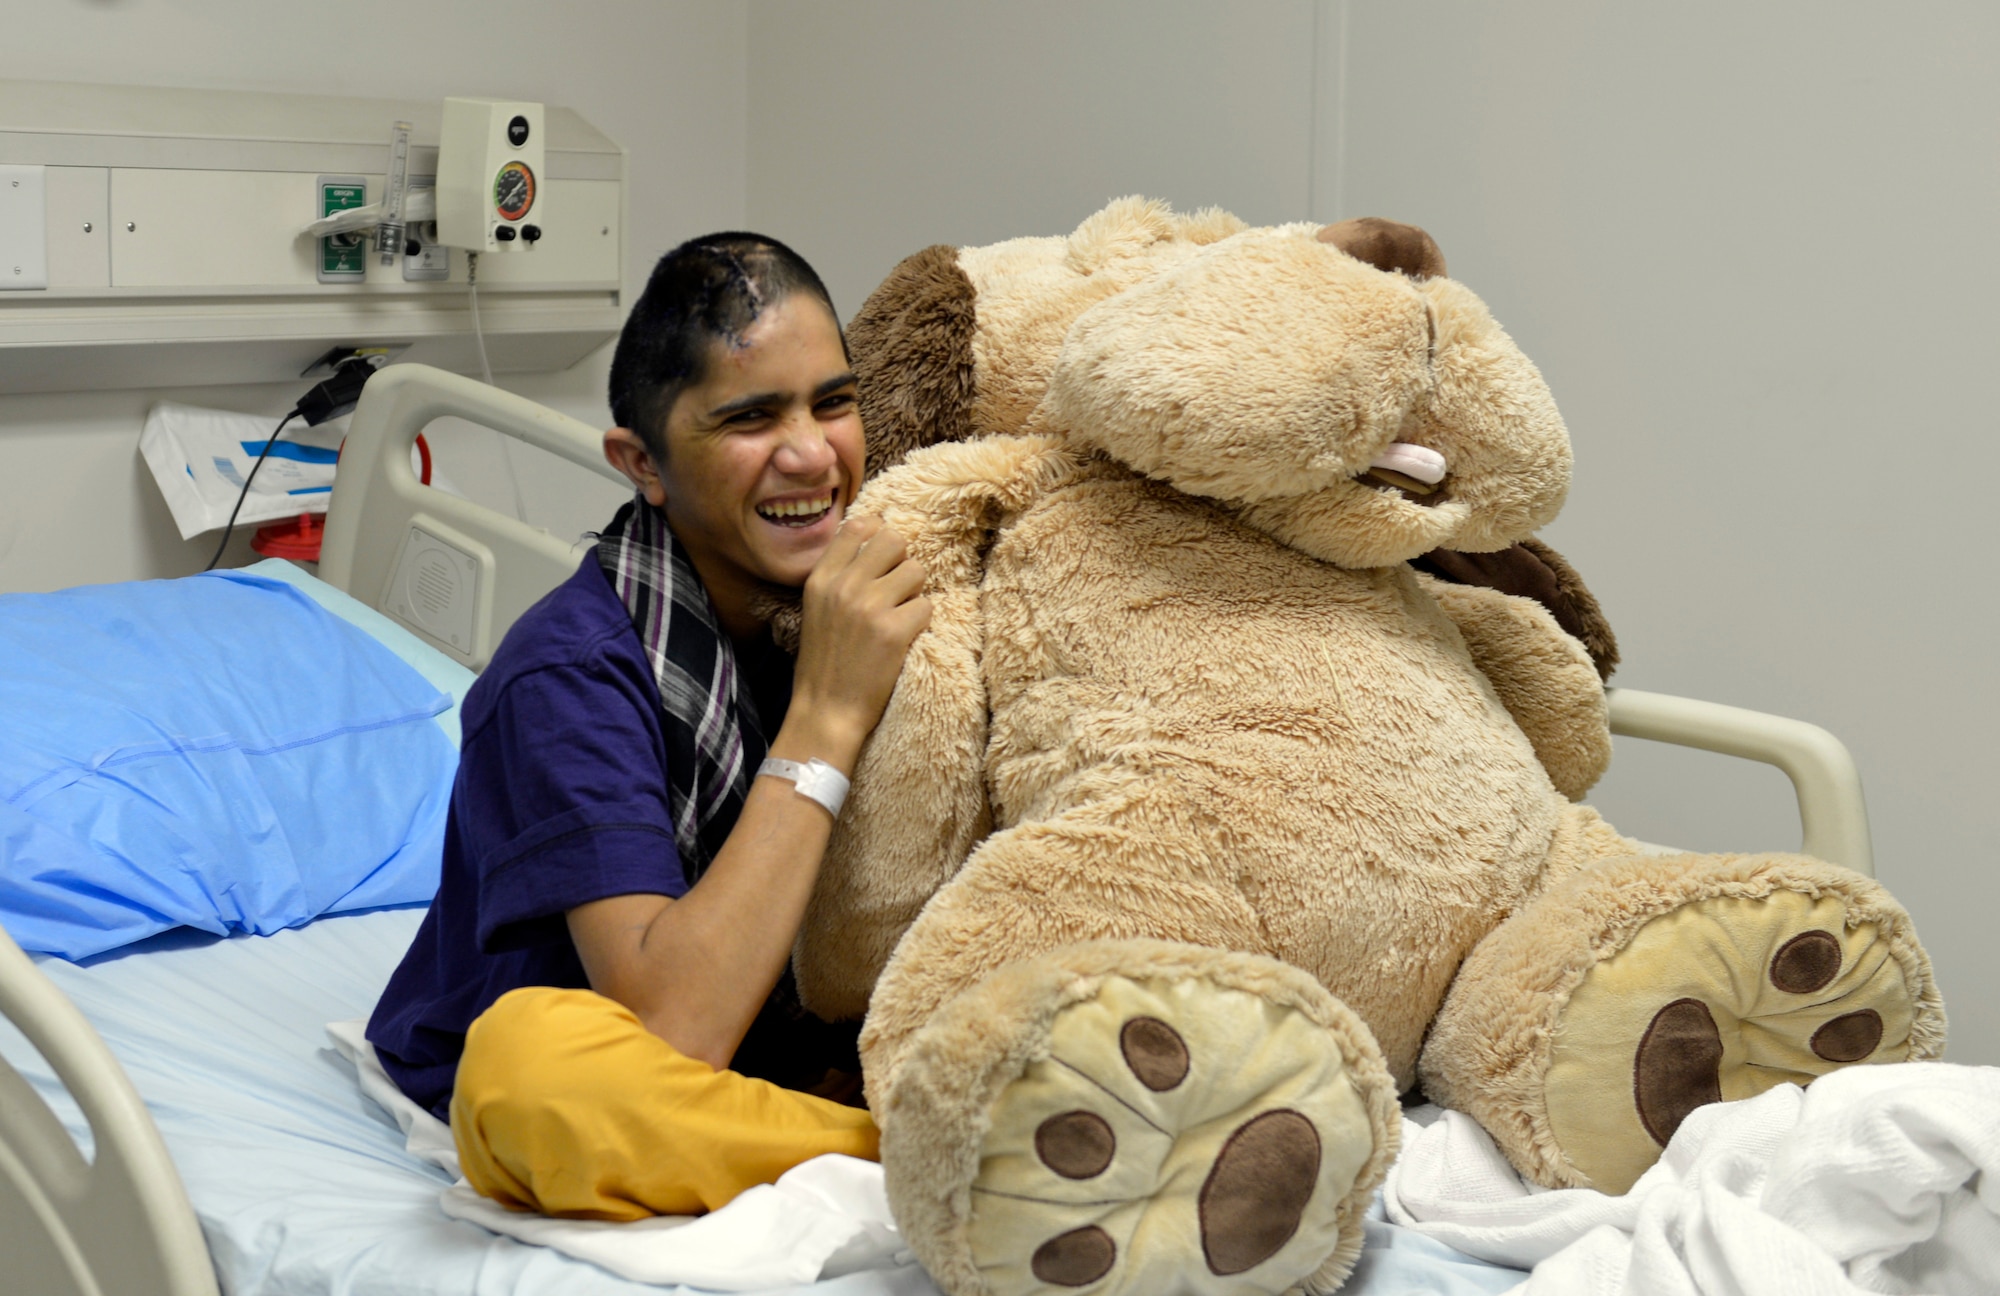 A 12-year-old boy sits in his hospital bed with a stuffed animal in the Craig Joint Theater Hospital on Bagram Airfield, Afghanistan, Oct. 20. The boy recently had a surgery to help release pressure on his brain and is being treated for an infection. Prior to coming in he could barely walk or talk and now he is smiling. Jones is a native of San Antonio, Texas.  (U.S. Air Force photo/ Staff Sgt. Stephenie Wade)